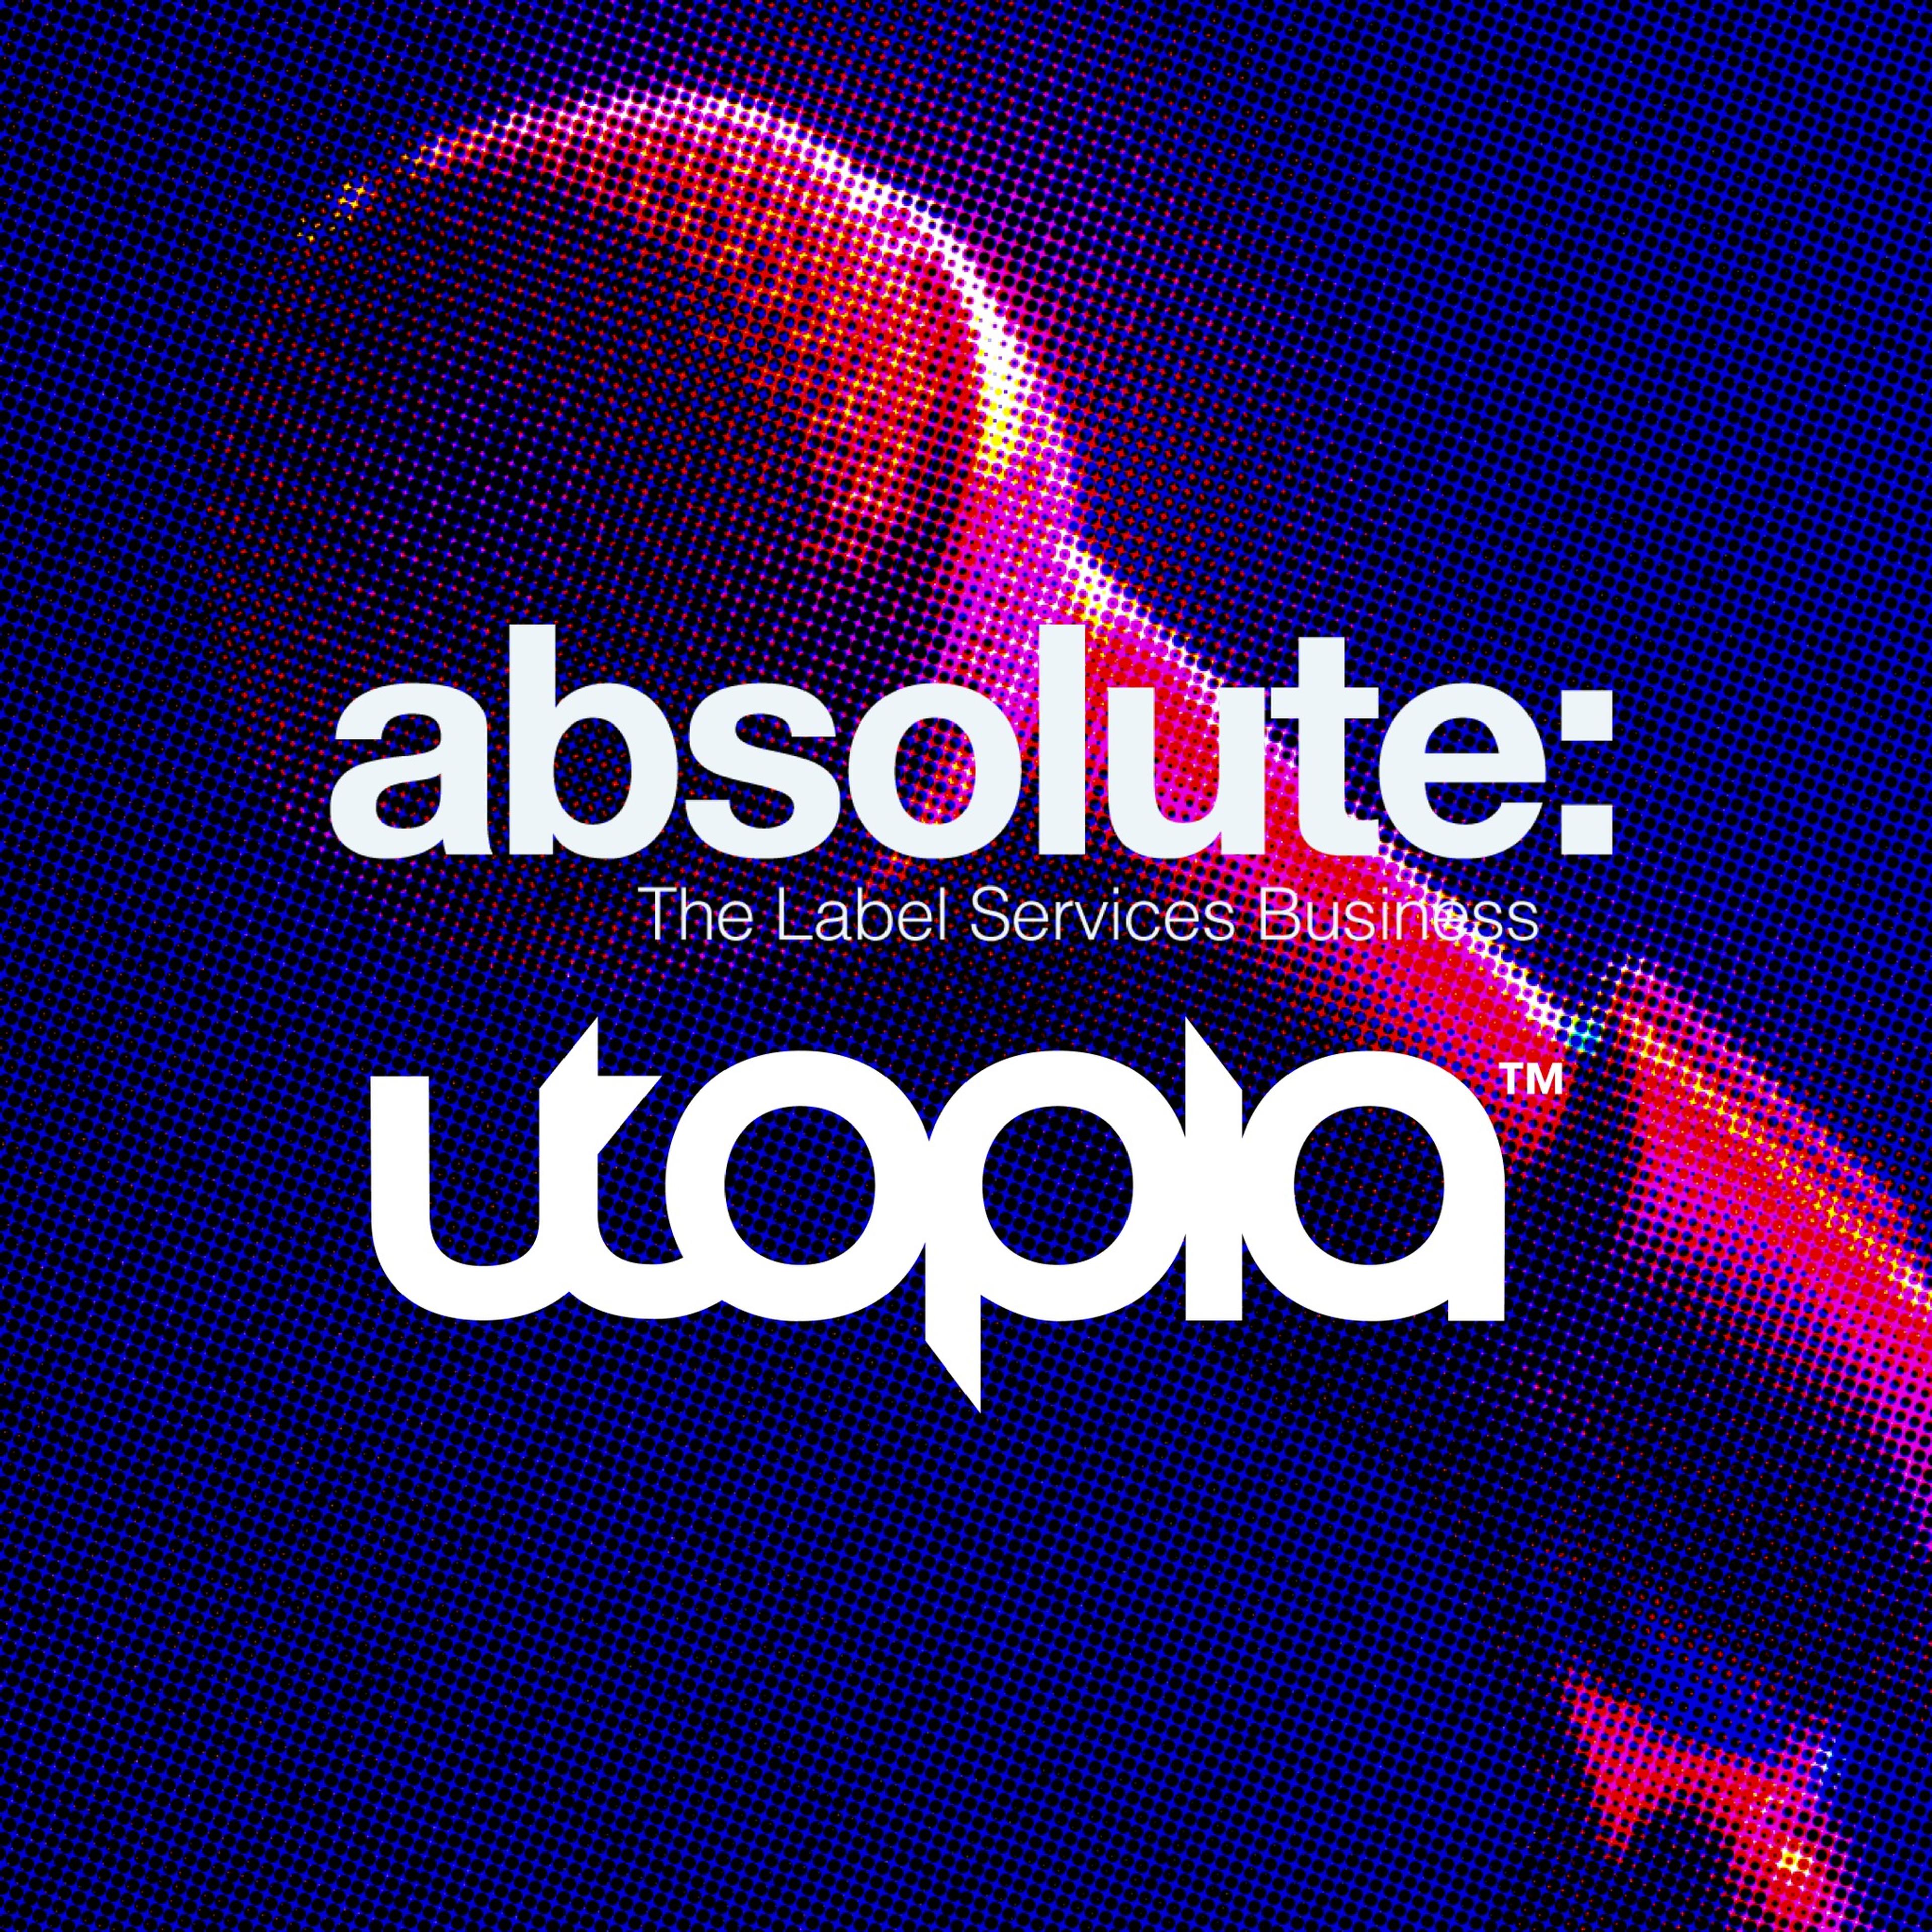 Card image for Utopia grows Distribution Services with acquisition of Absolute Label Services